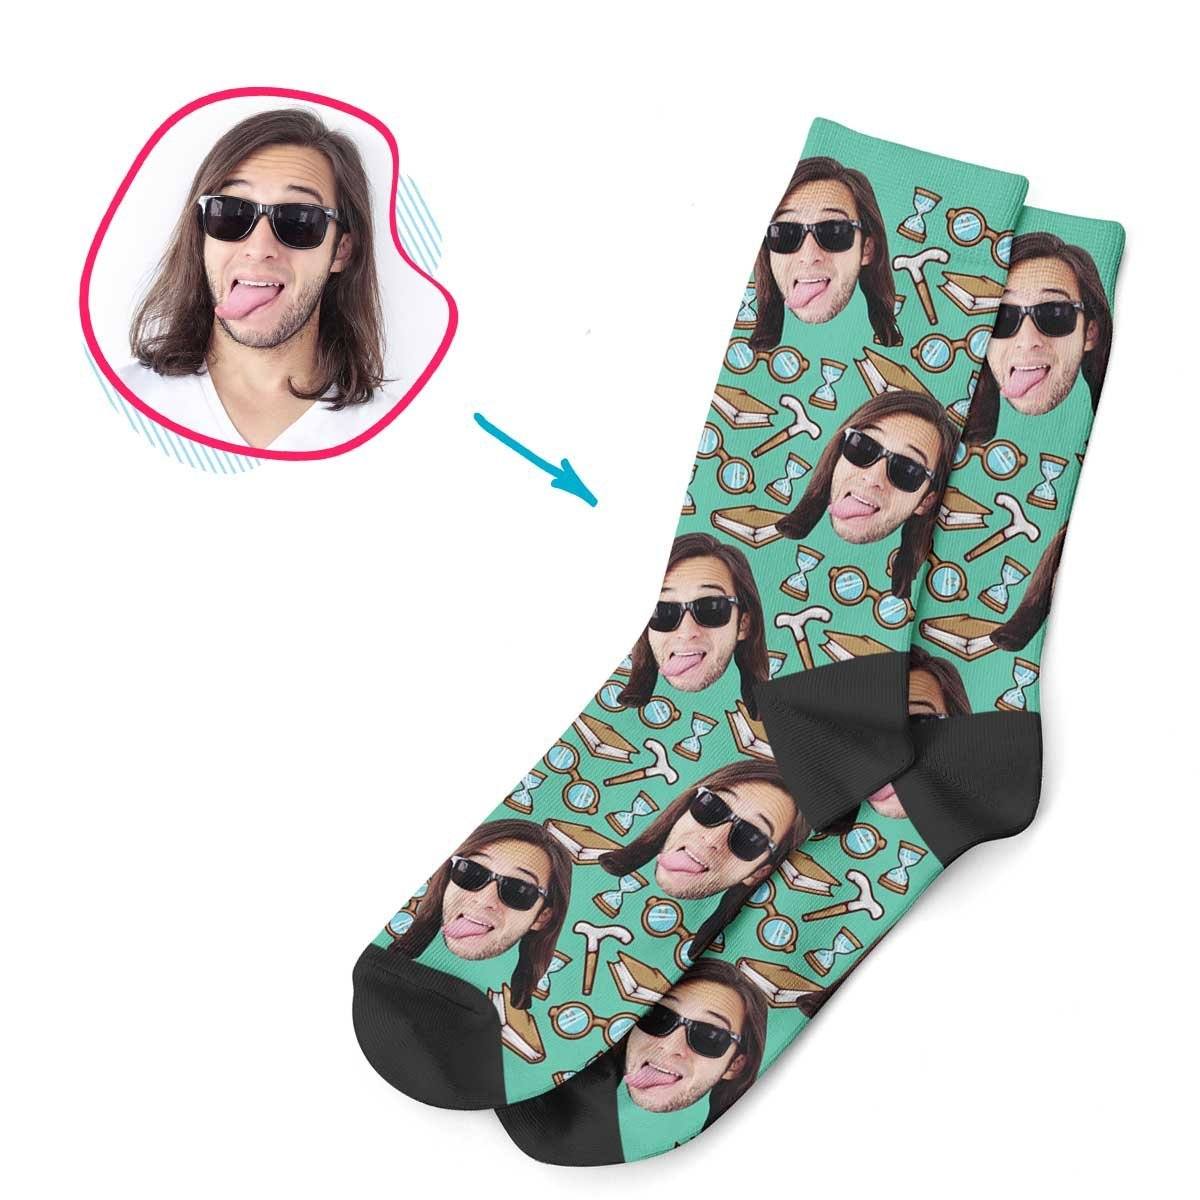 Mint Retirement personalized socks with photo of face printed on them